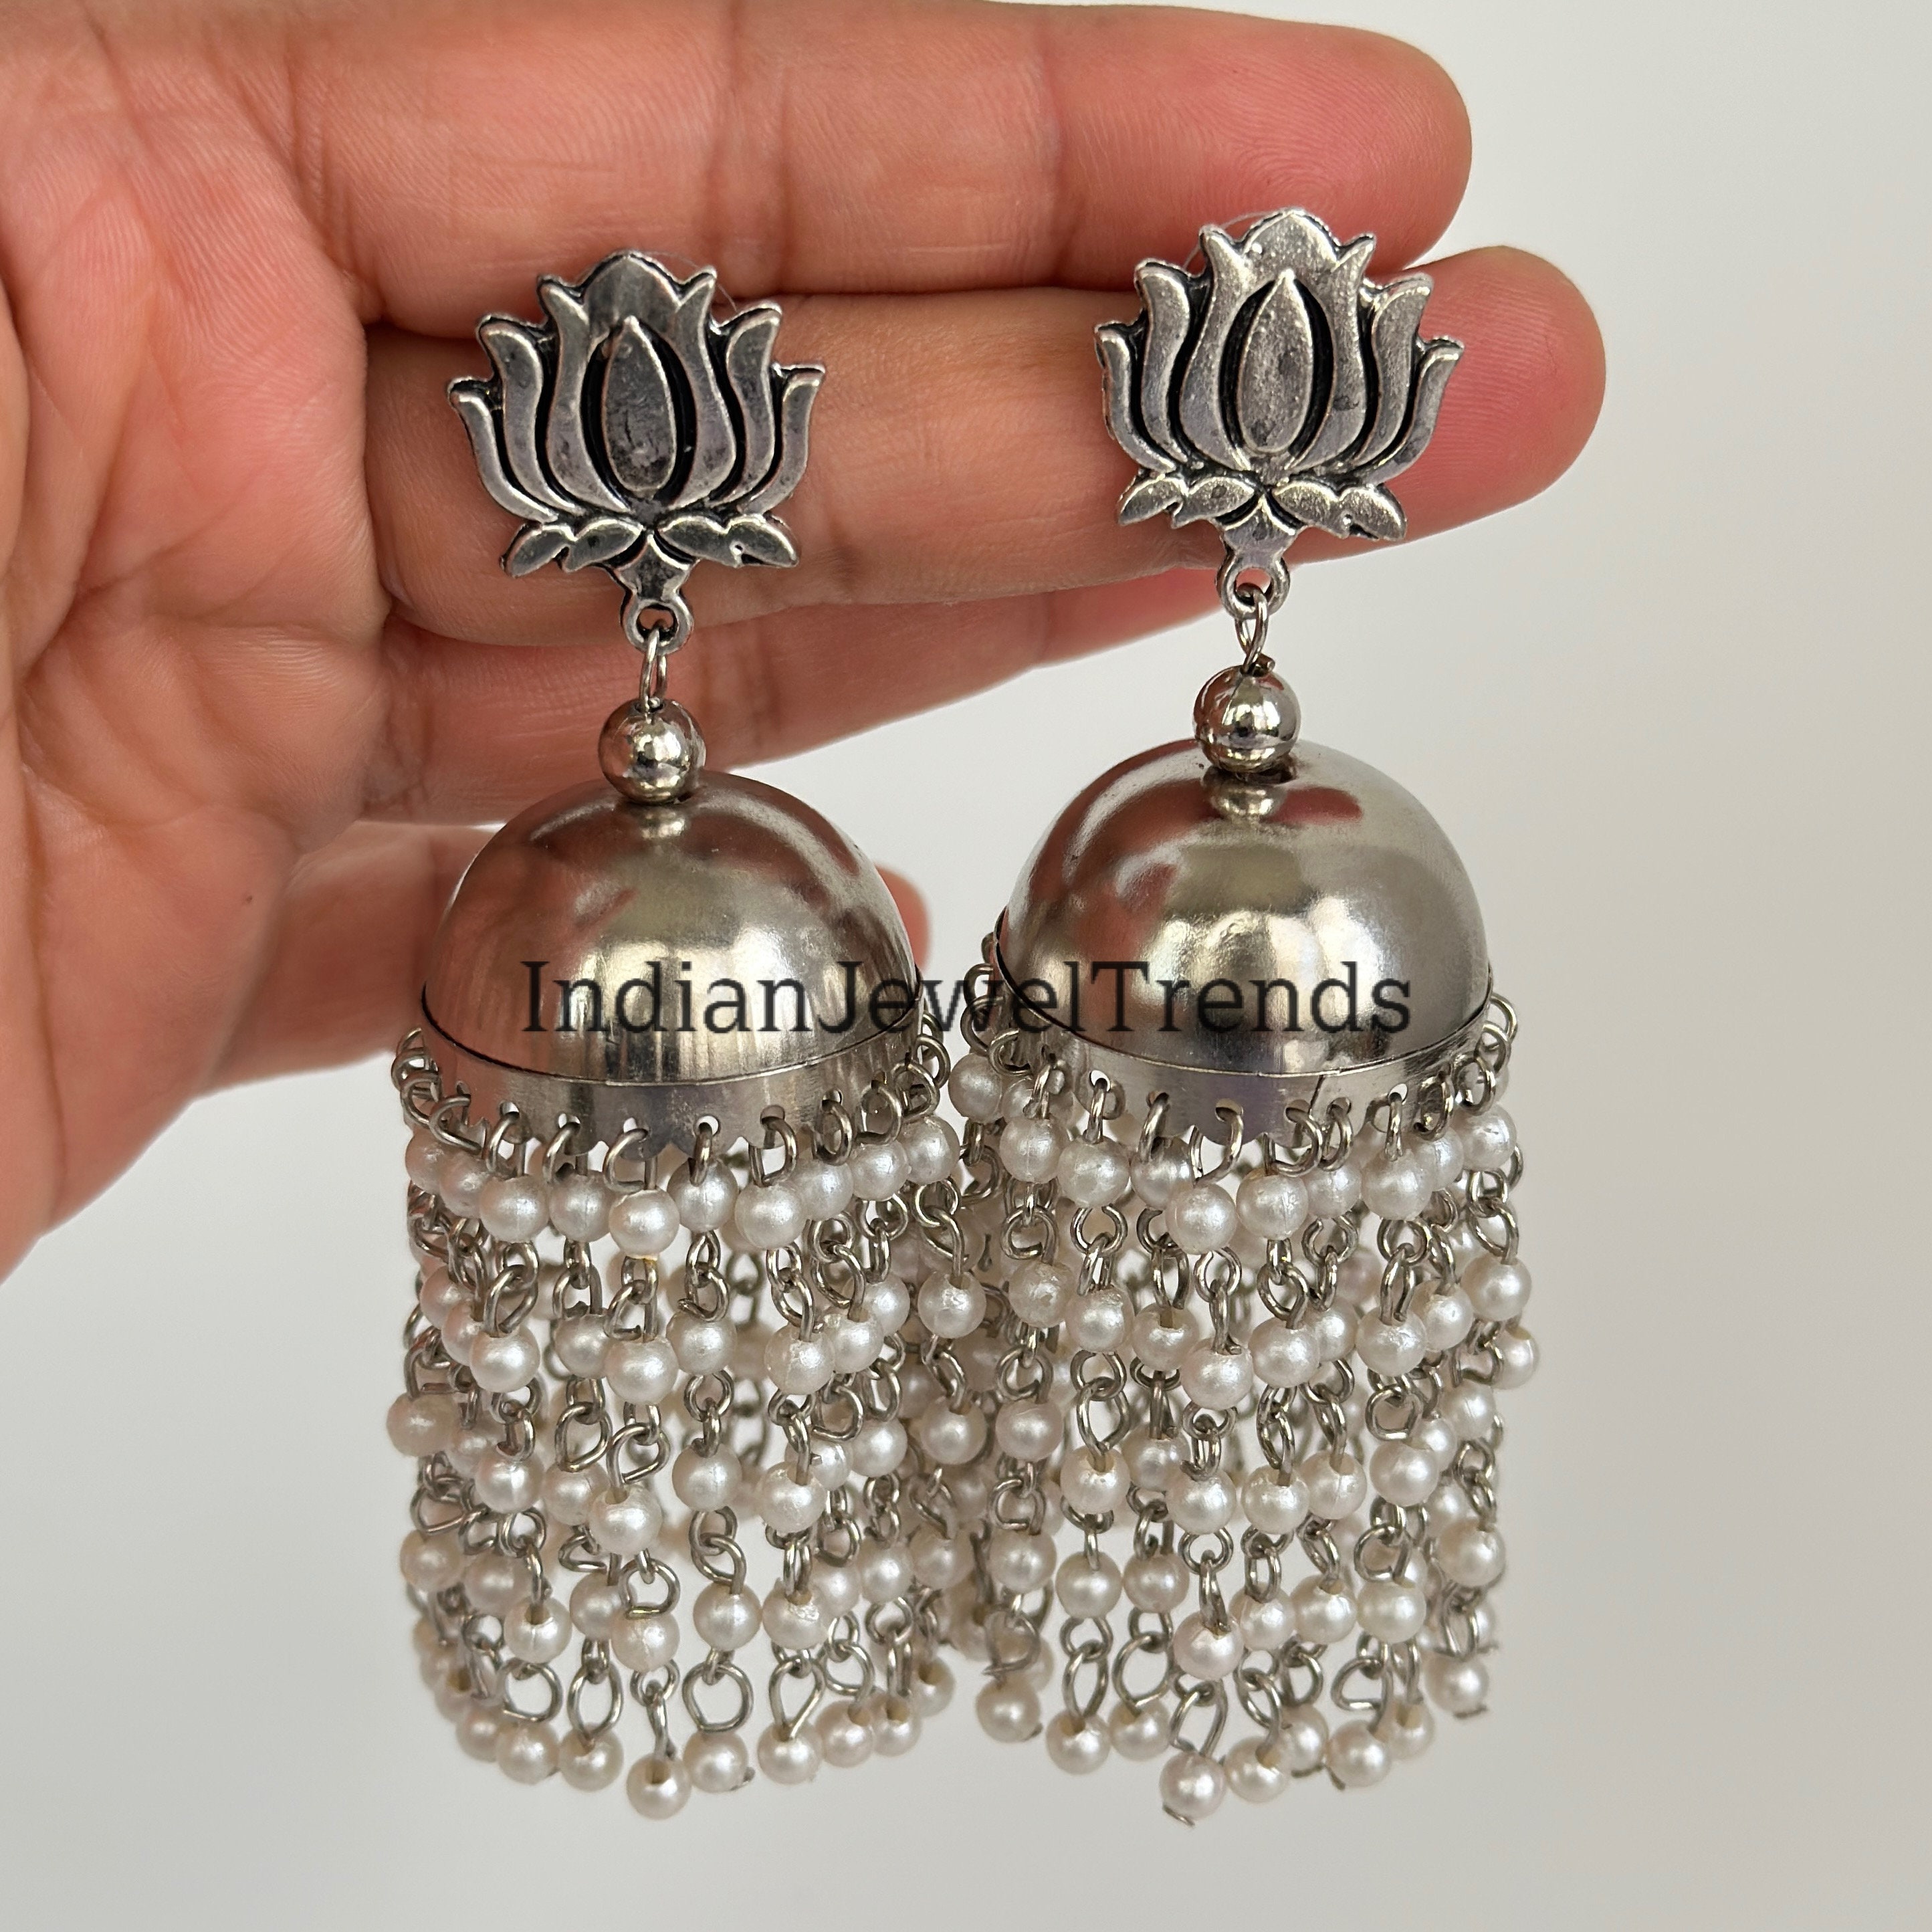 Flipkart.com - Buy VAGHBHATT Fashion Bollywood Traditional Indian Wedding Silver  Jhumka Earrings for women Sterling Silver Jhumki Earring Online at Best  Prices in India